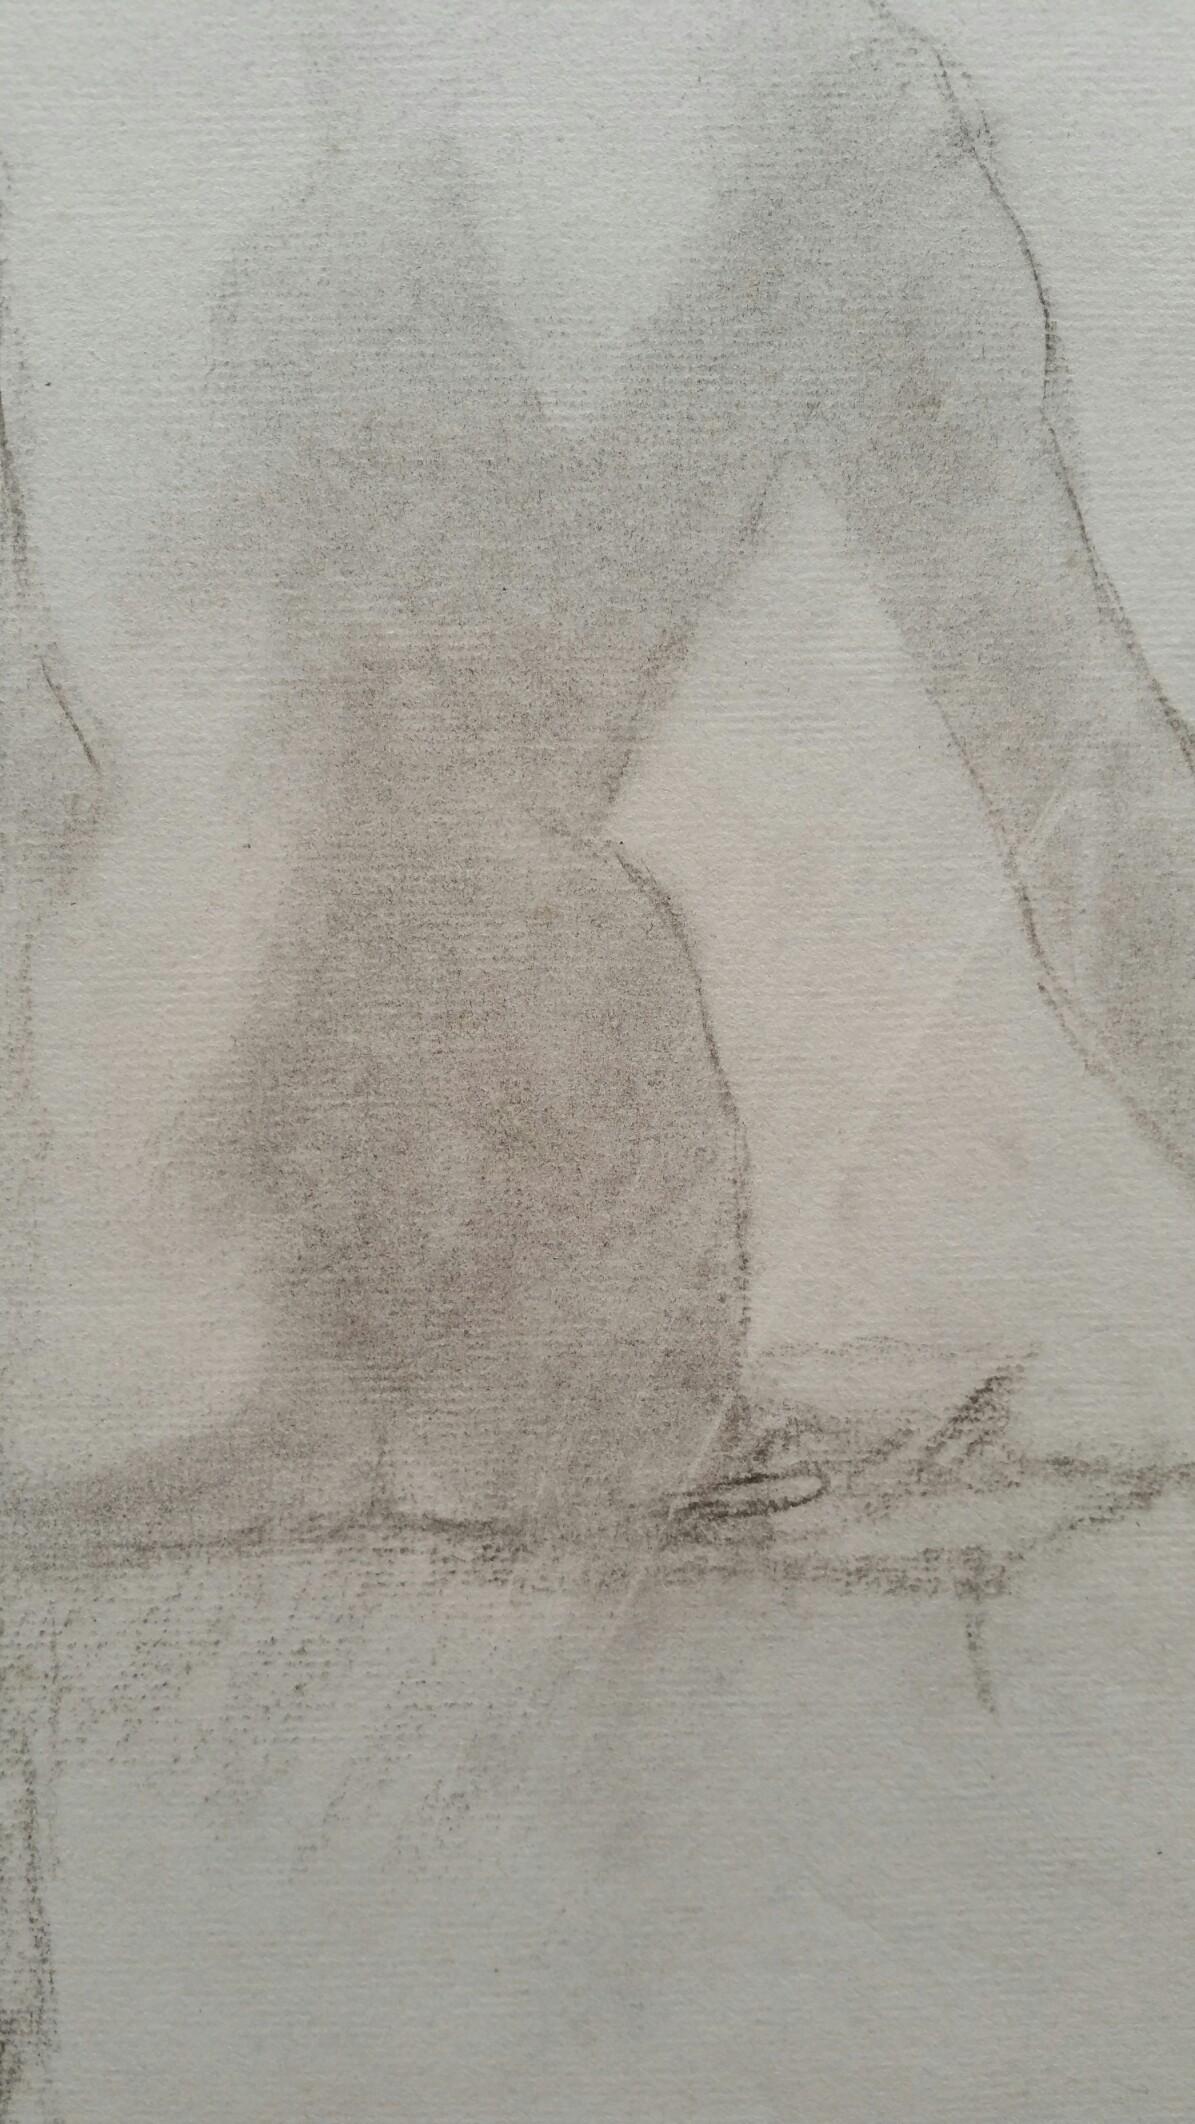 English Graphite Sketch of a Female Nude, Back View, Seated
by Henry George Moon (British 1857-1905)
on off white artists paper, unframed
measurements: sheet 18.75 x 12 inches 

provenance: from the artists estate

Condition report: pin holes to